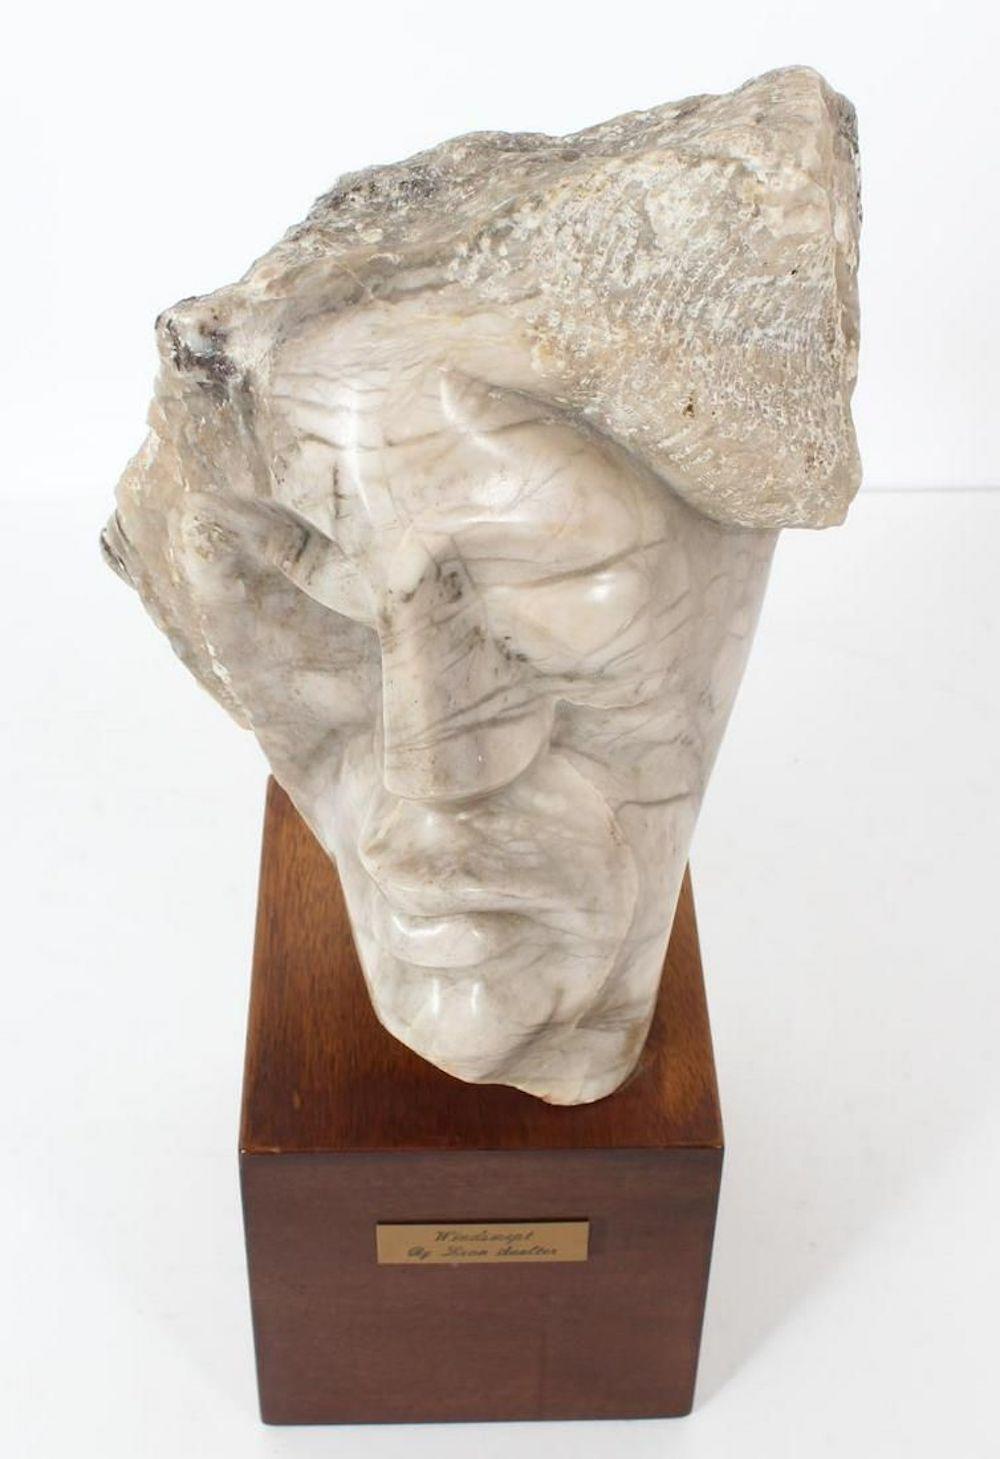 Windswept Face Of A Man Marble Sculpture 
Signed, on wooden base.
Leon Saulter (1908 - 1986) was active/lived in California  born in Poland. Moved to US in 1921. Leon Saulter is known for sculptures, paintings also writer. 
Born in Poland on March